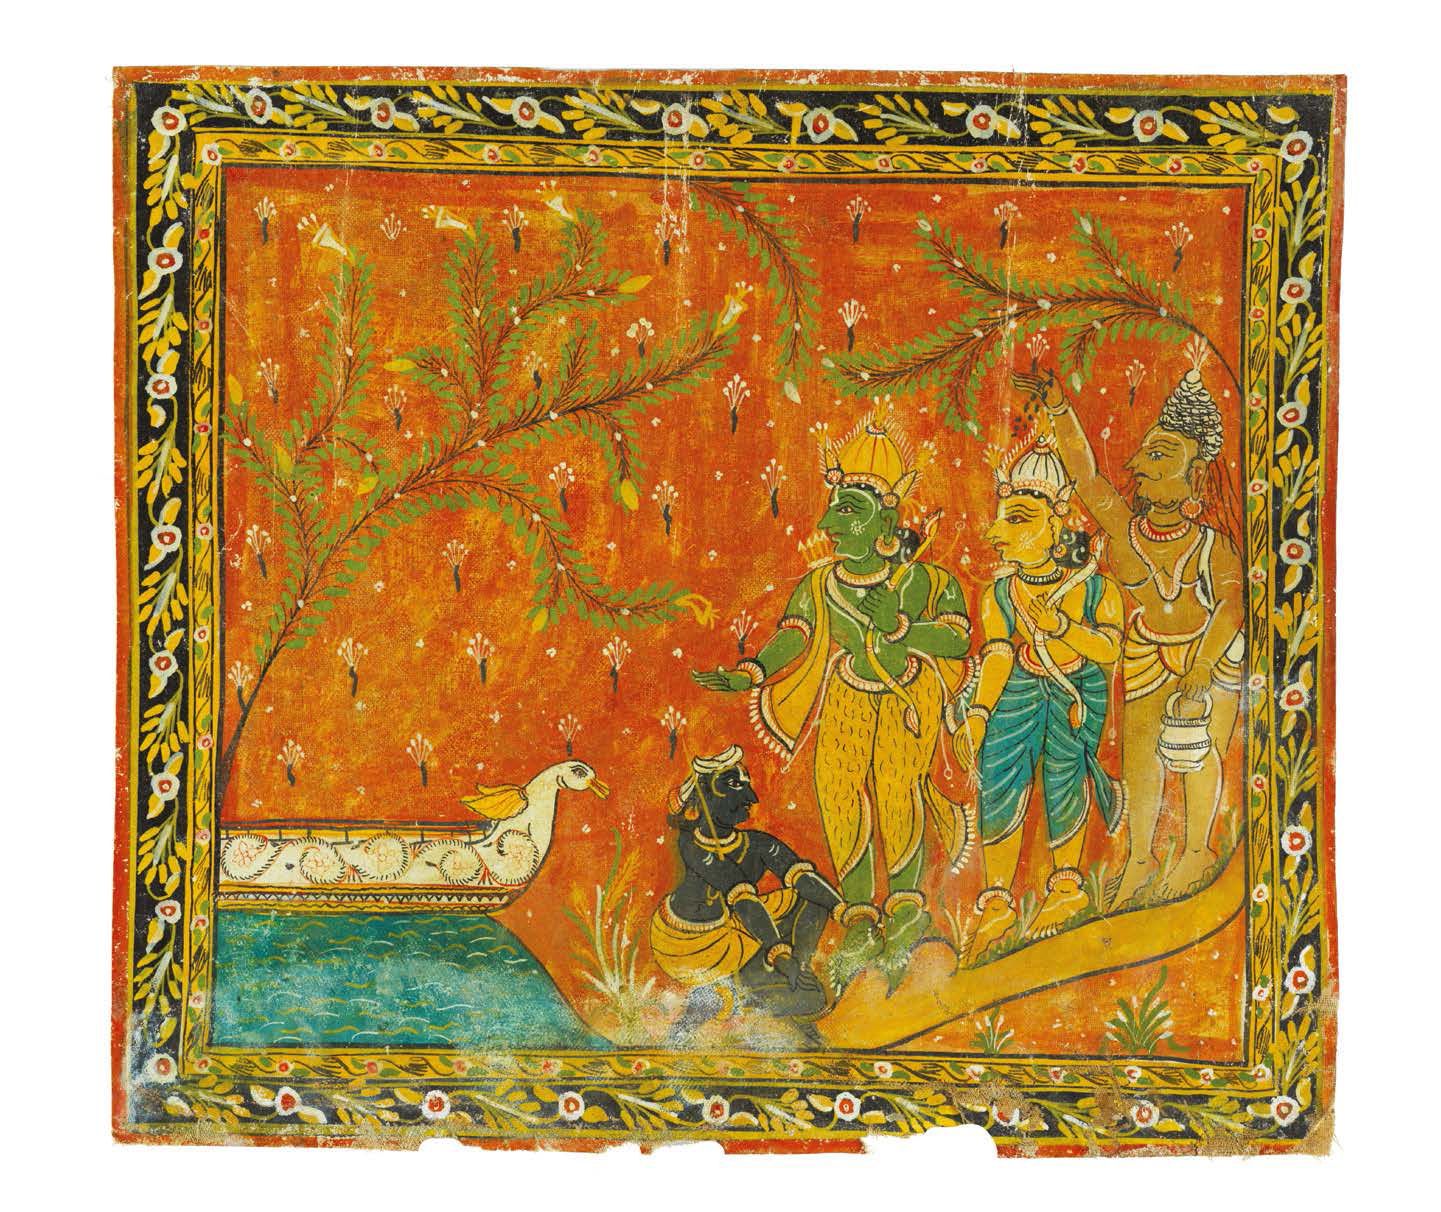 Null EPISODE OF THE RAMAYANA. Polychrome pigments on fabric. Rama, Sita and Laks&hellip;